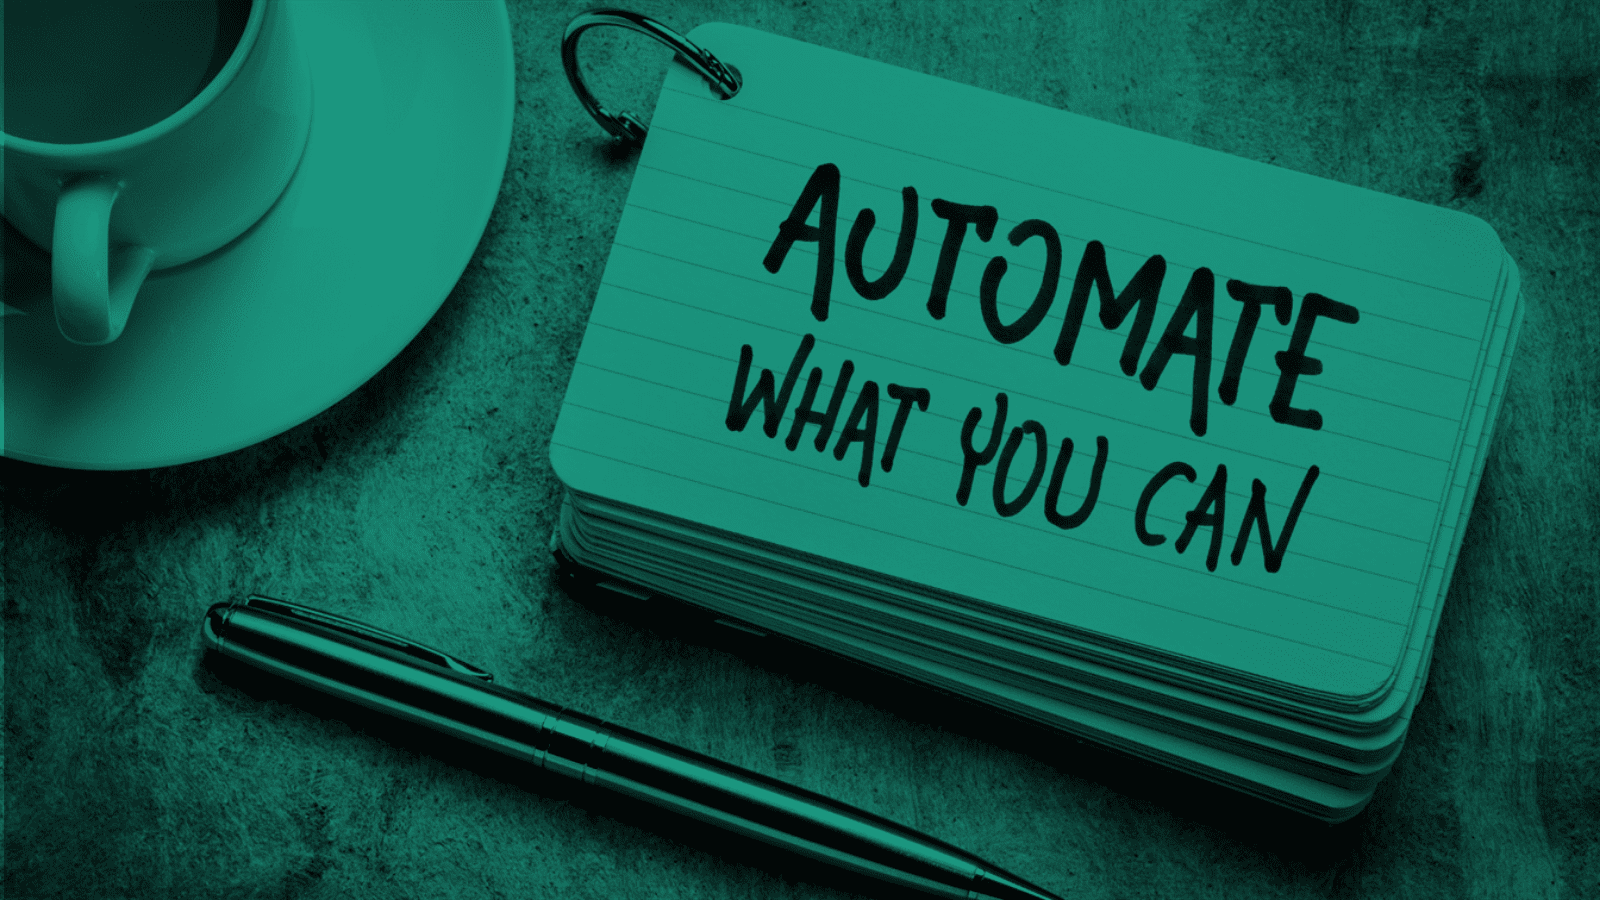 What is business process automation